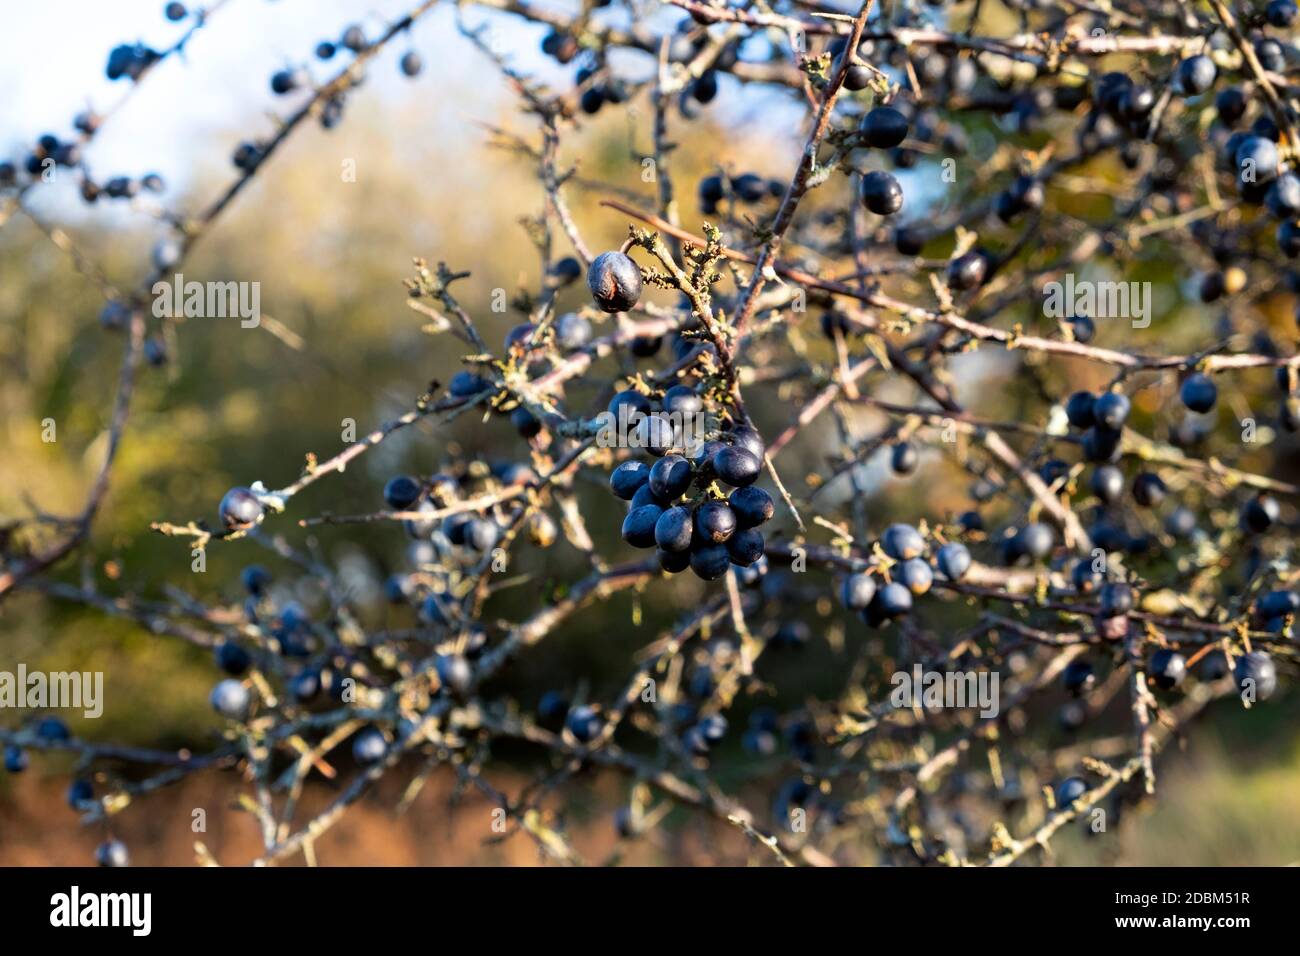 Sloes wild blue sloe berries ready for picking on thorny shrub tree in the Dyfed Carmarthenshire countryside Wales UK 2020  KATHY DEWITT Stock Photo